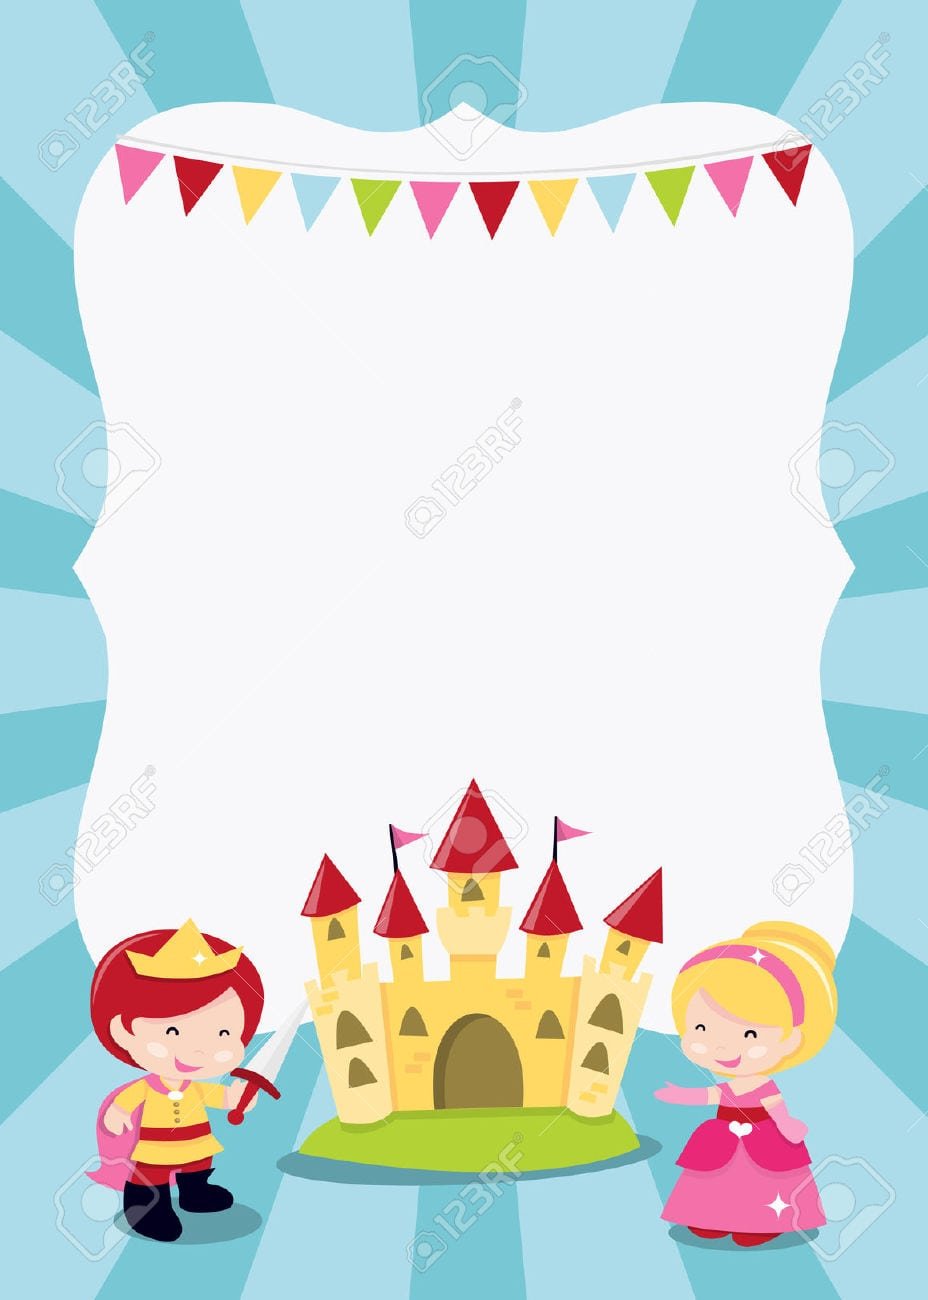 A Cartoon Illustration Of A Princesses, Prince And Knight Party